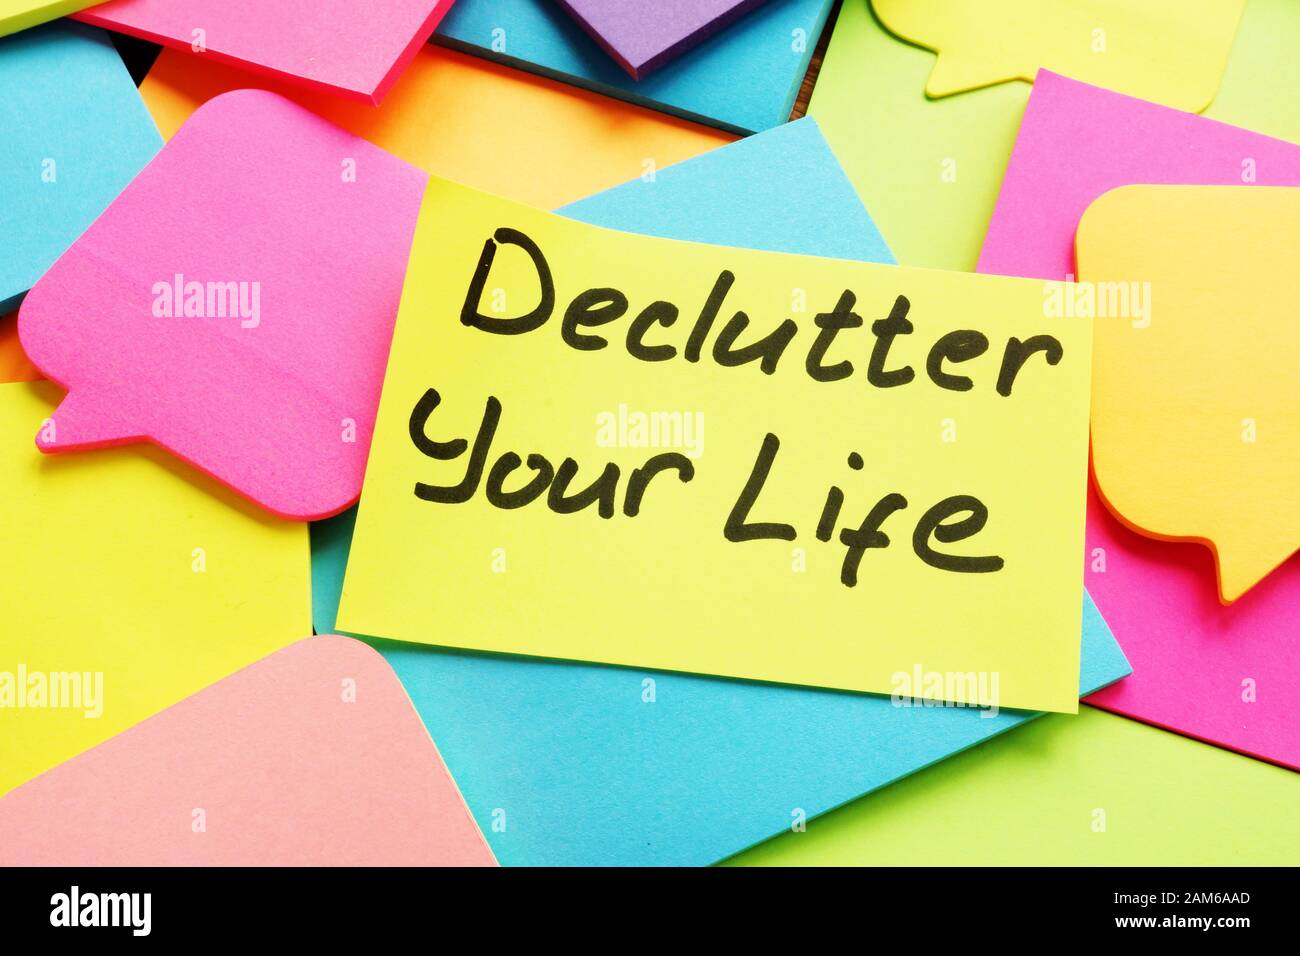 Declutter your life written by hand on the sheet. Stock Photo